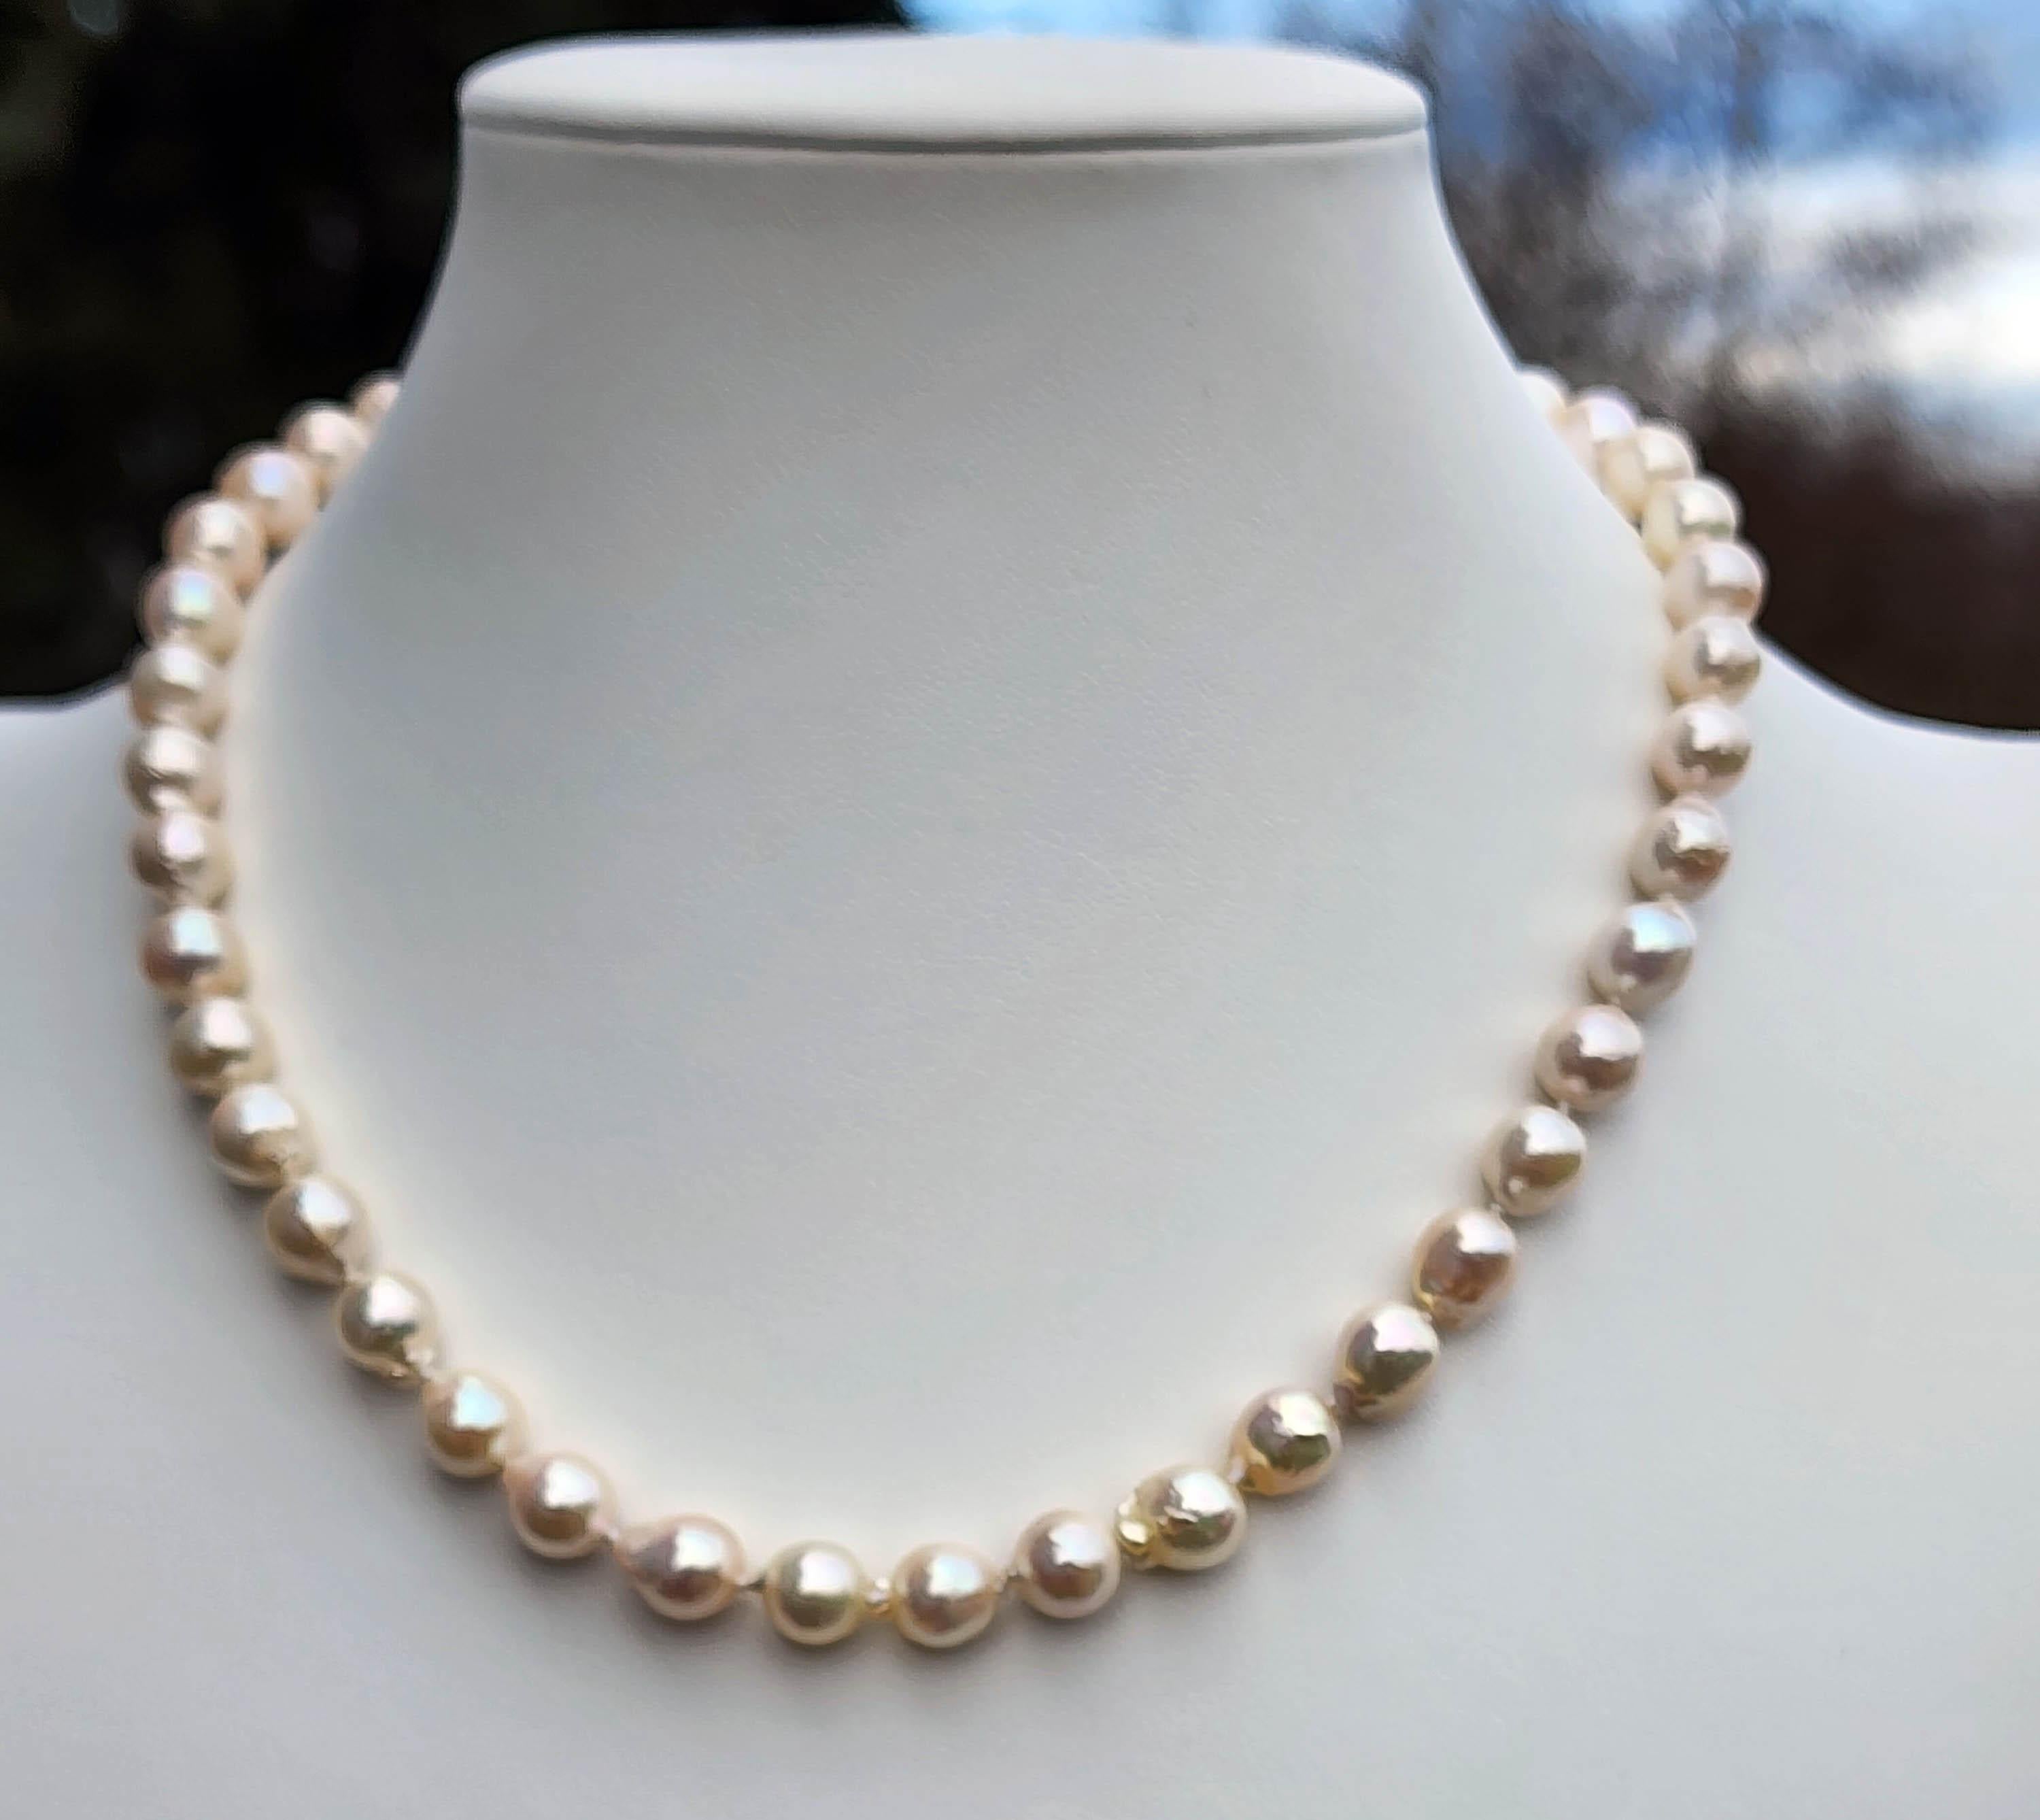 A Pearl Necklace and Bracelet set of Cultured Salt Water Pearls. The Necklace is 16.5 Inches in length, and the pearls are 8.2mm in size. There are 23 Pearls on the necklace. The Bracelet is 6.5 inches in length and the pearls match those of the